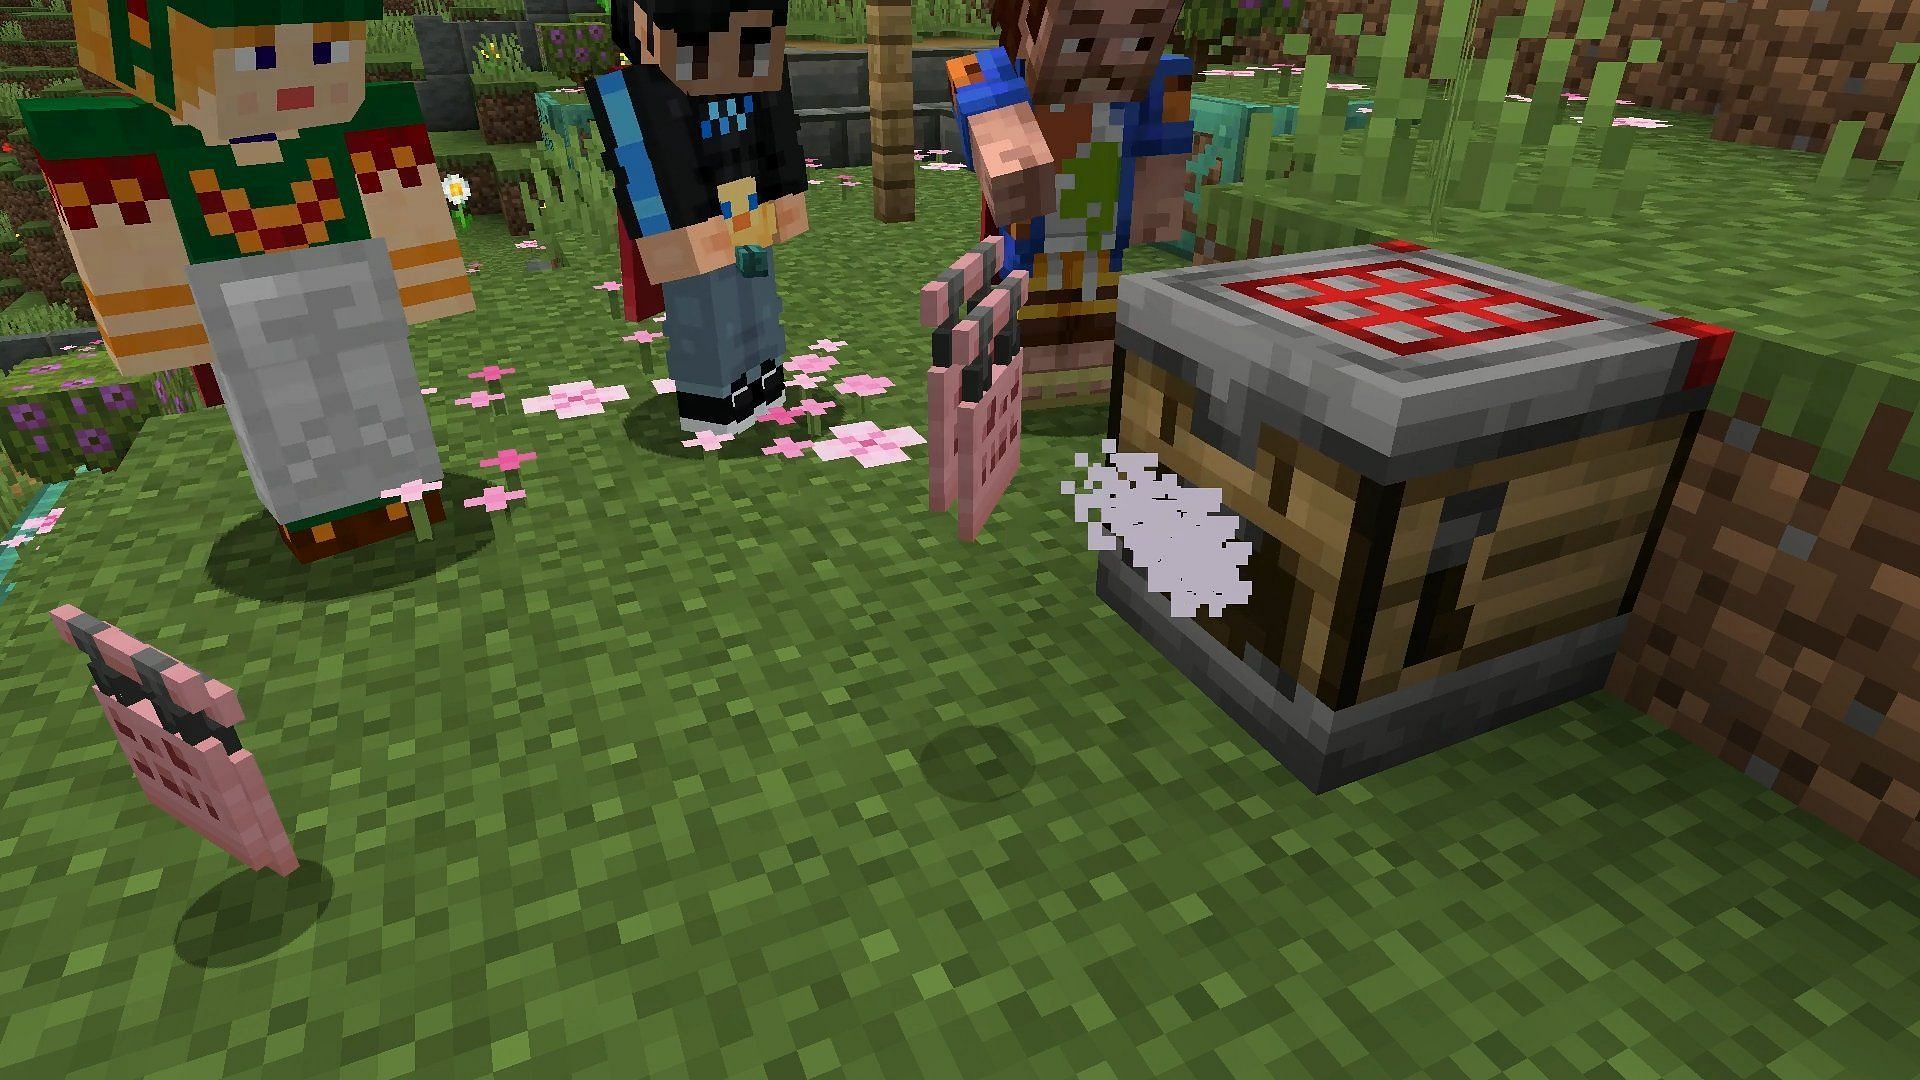 The crafter creates multiple hanging signs based on a recipe set by the player (Image via Mojang)